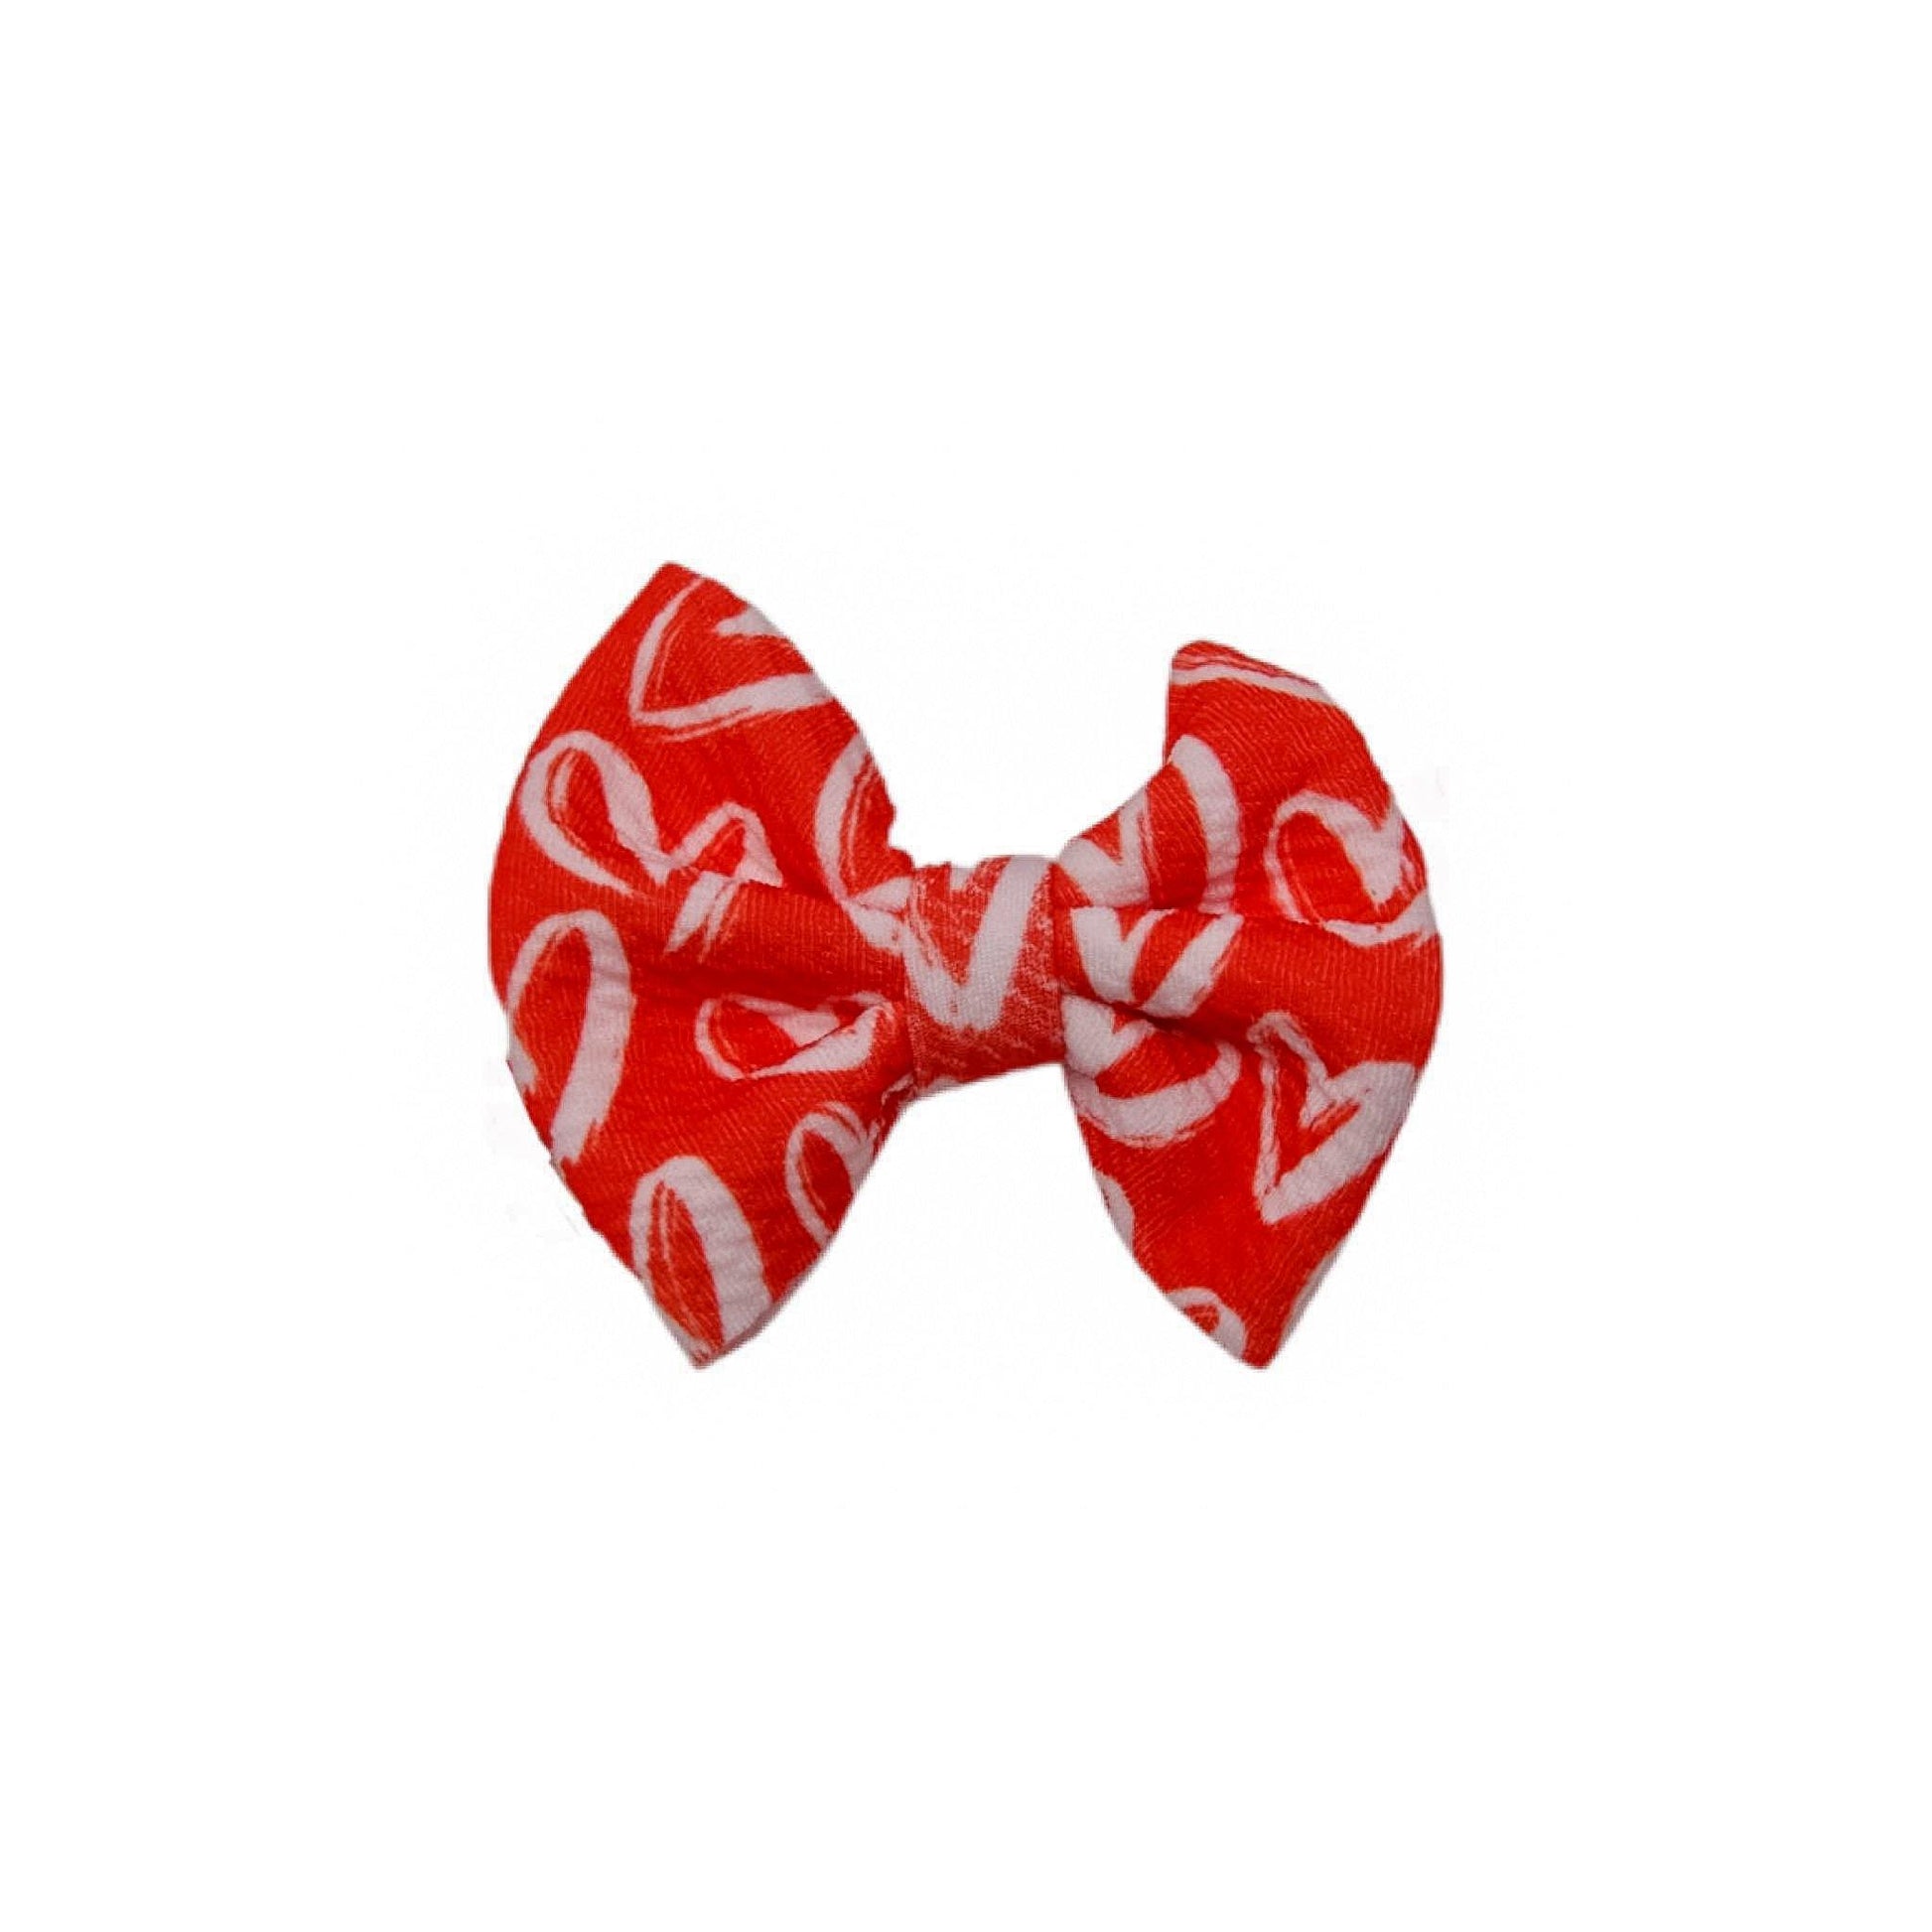 White Hearts on Red Fabric Bow 5"